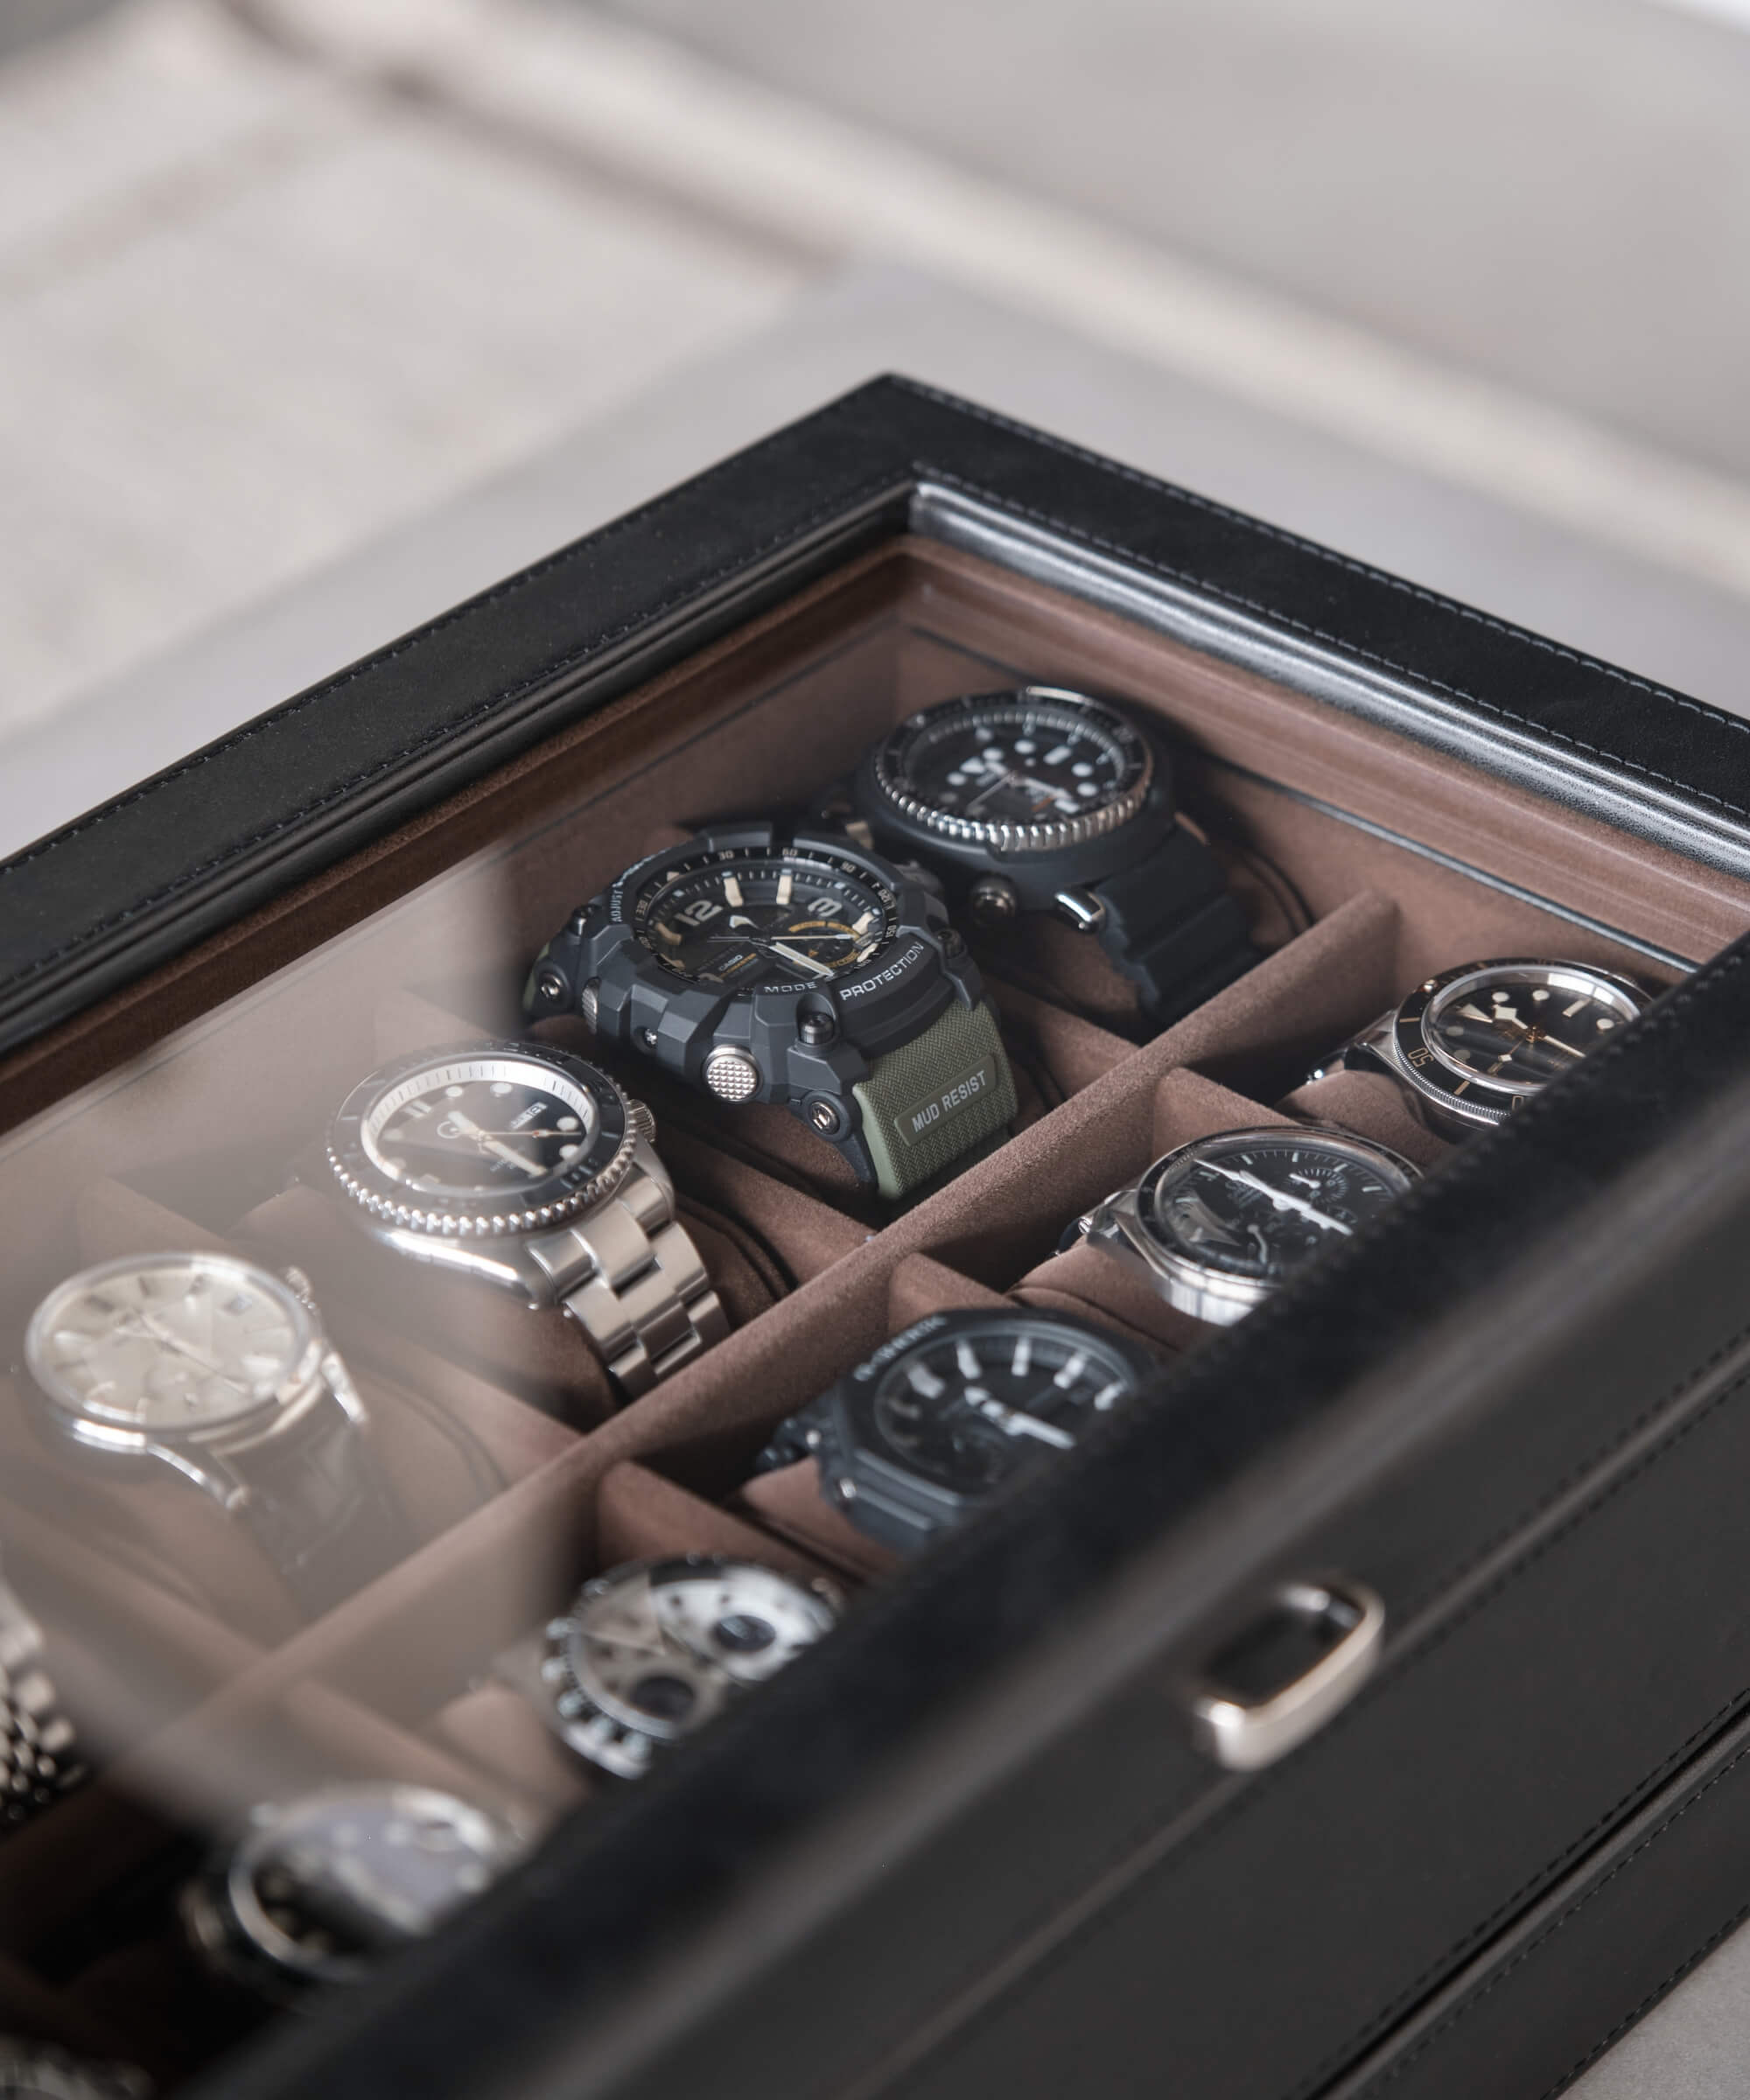 The TAWBURY Bayswater 24 Slot Watch Box with Drawer - Black is a sleek black watch case designed to organise and protect several watches.